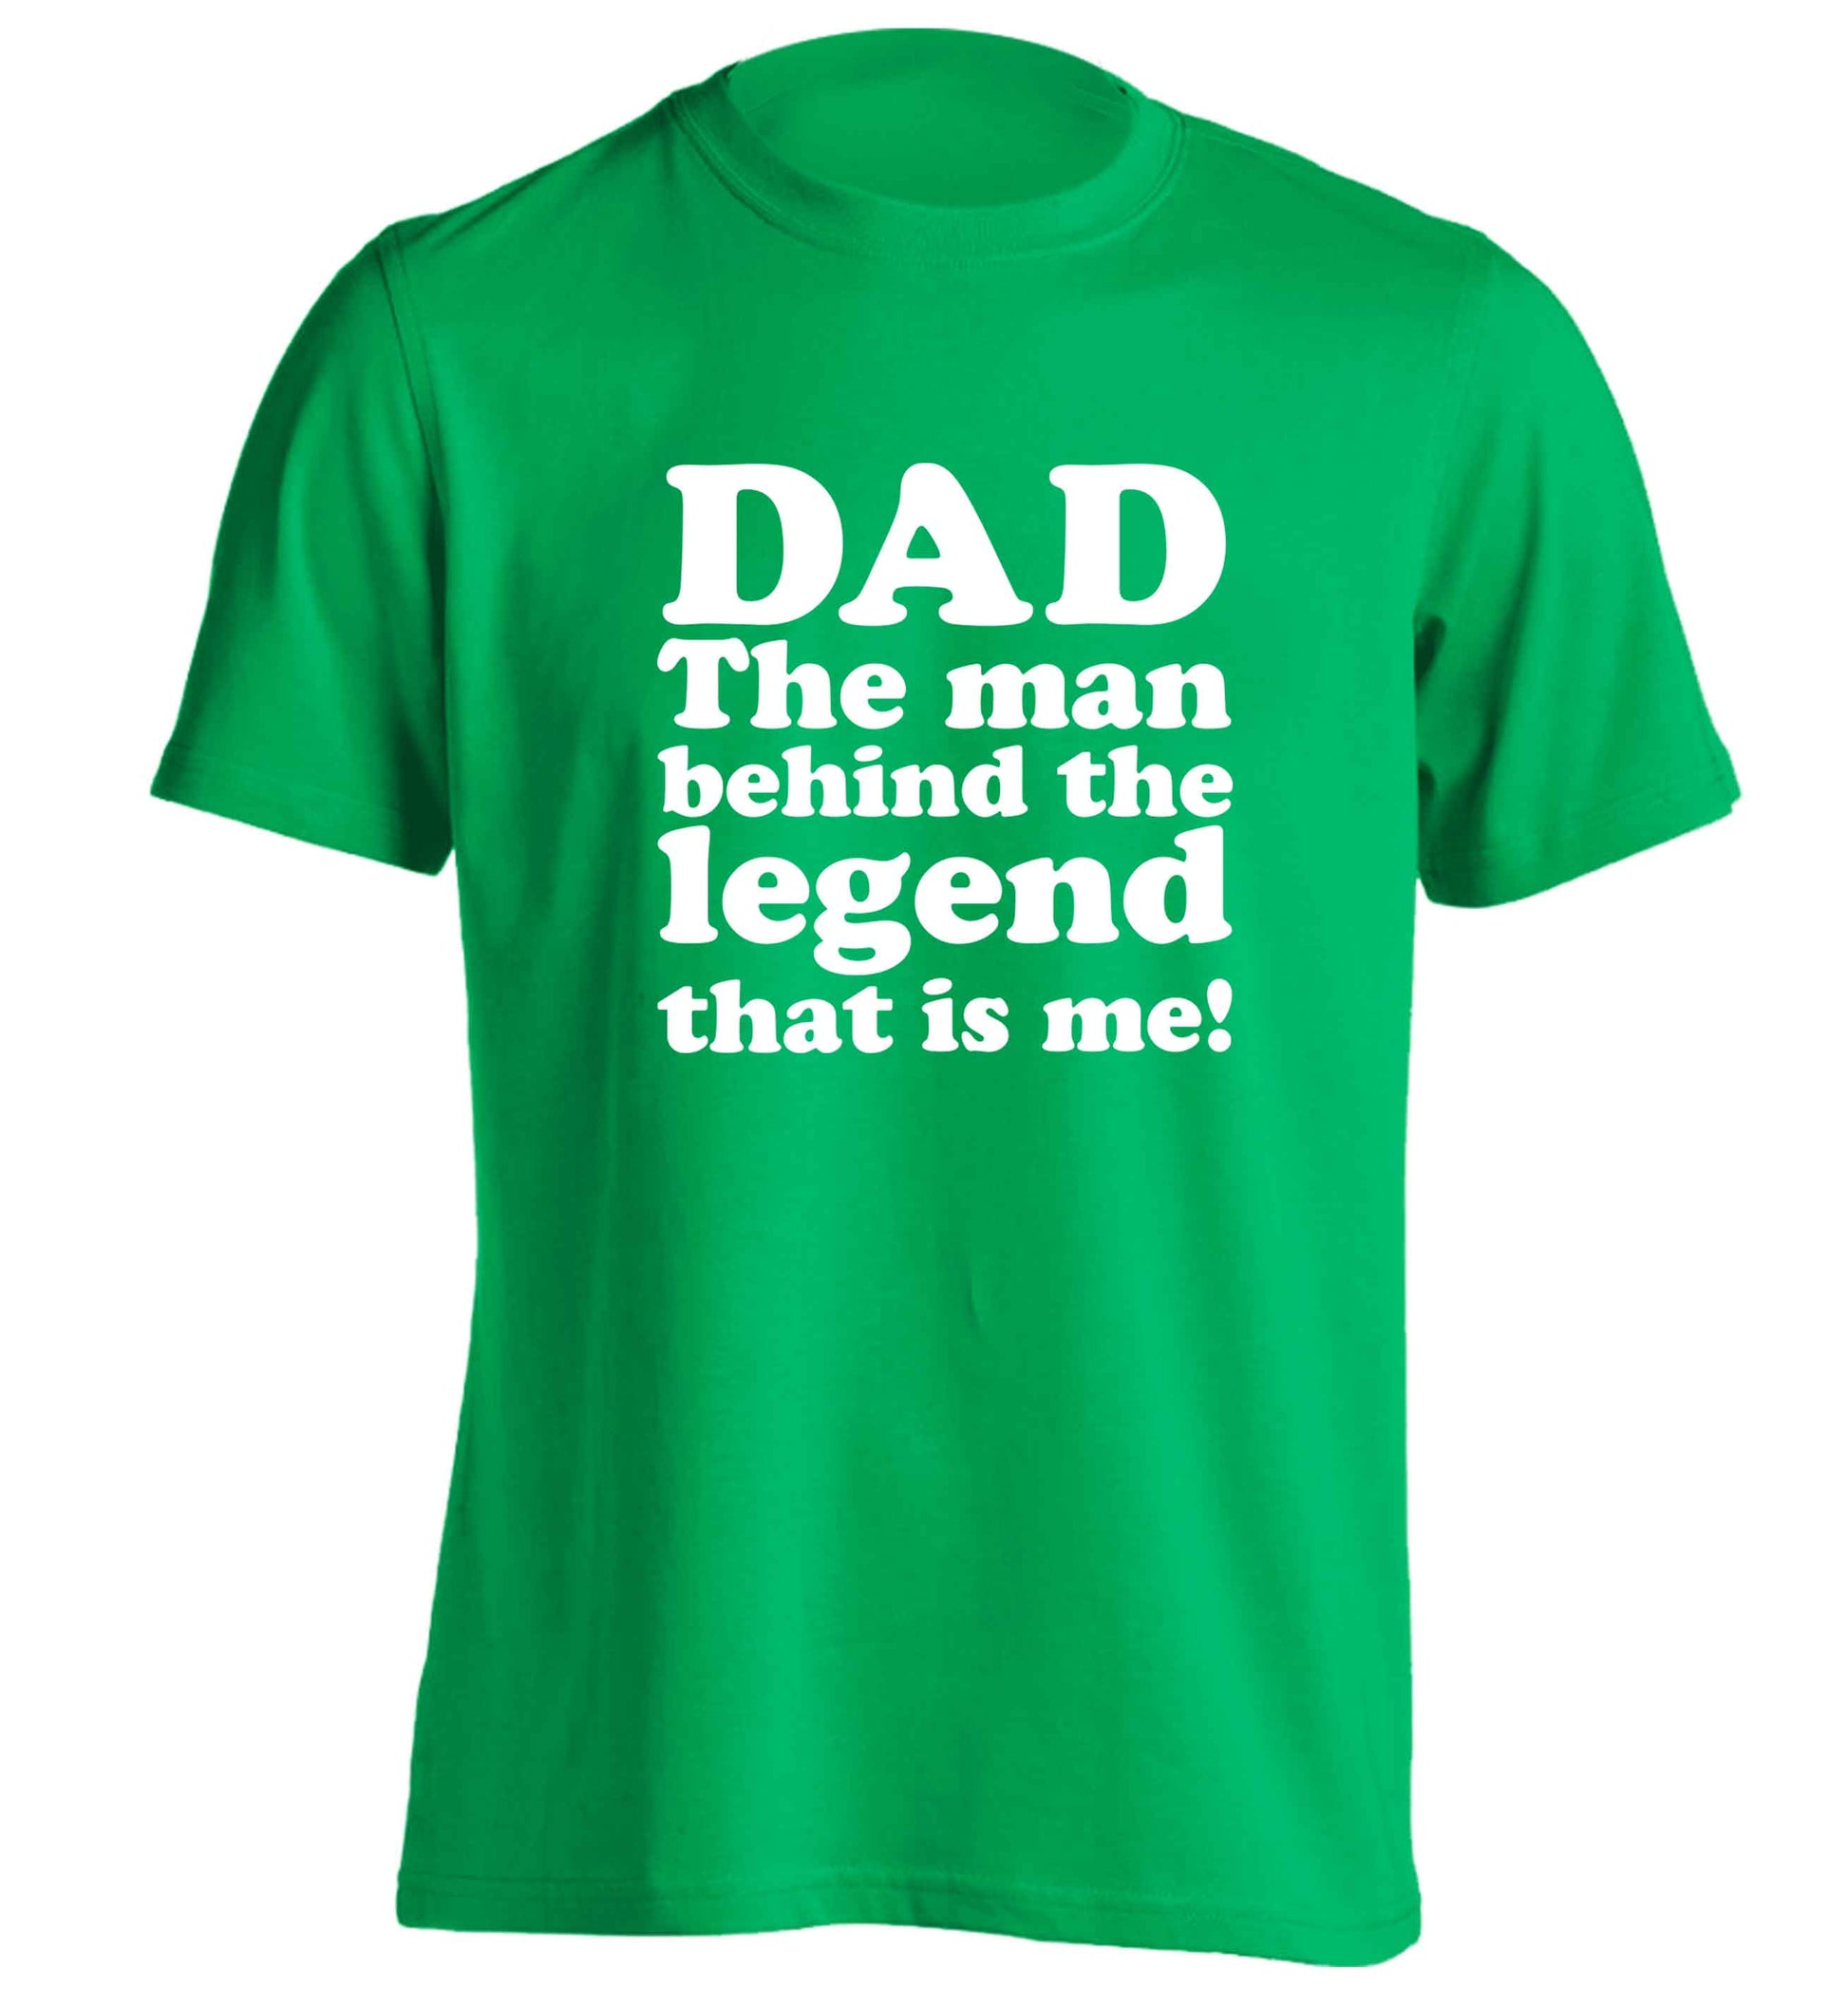 Dad the man behind the legend that is me adults unisex green Tshirt 2XL